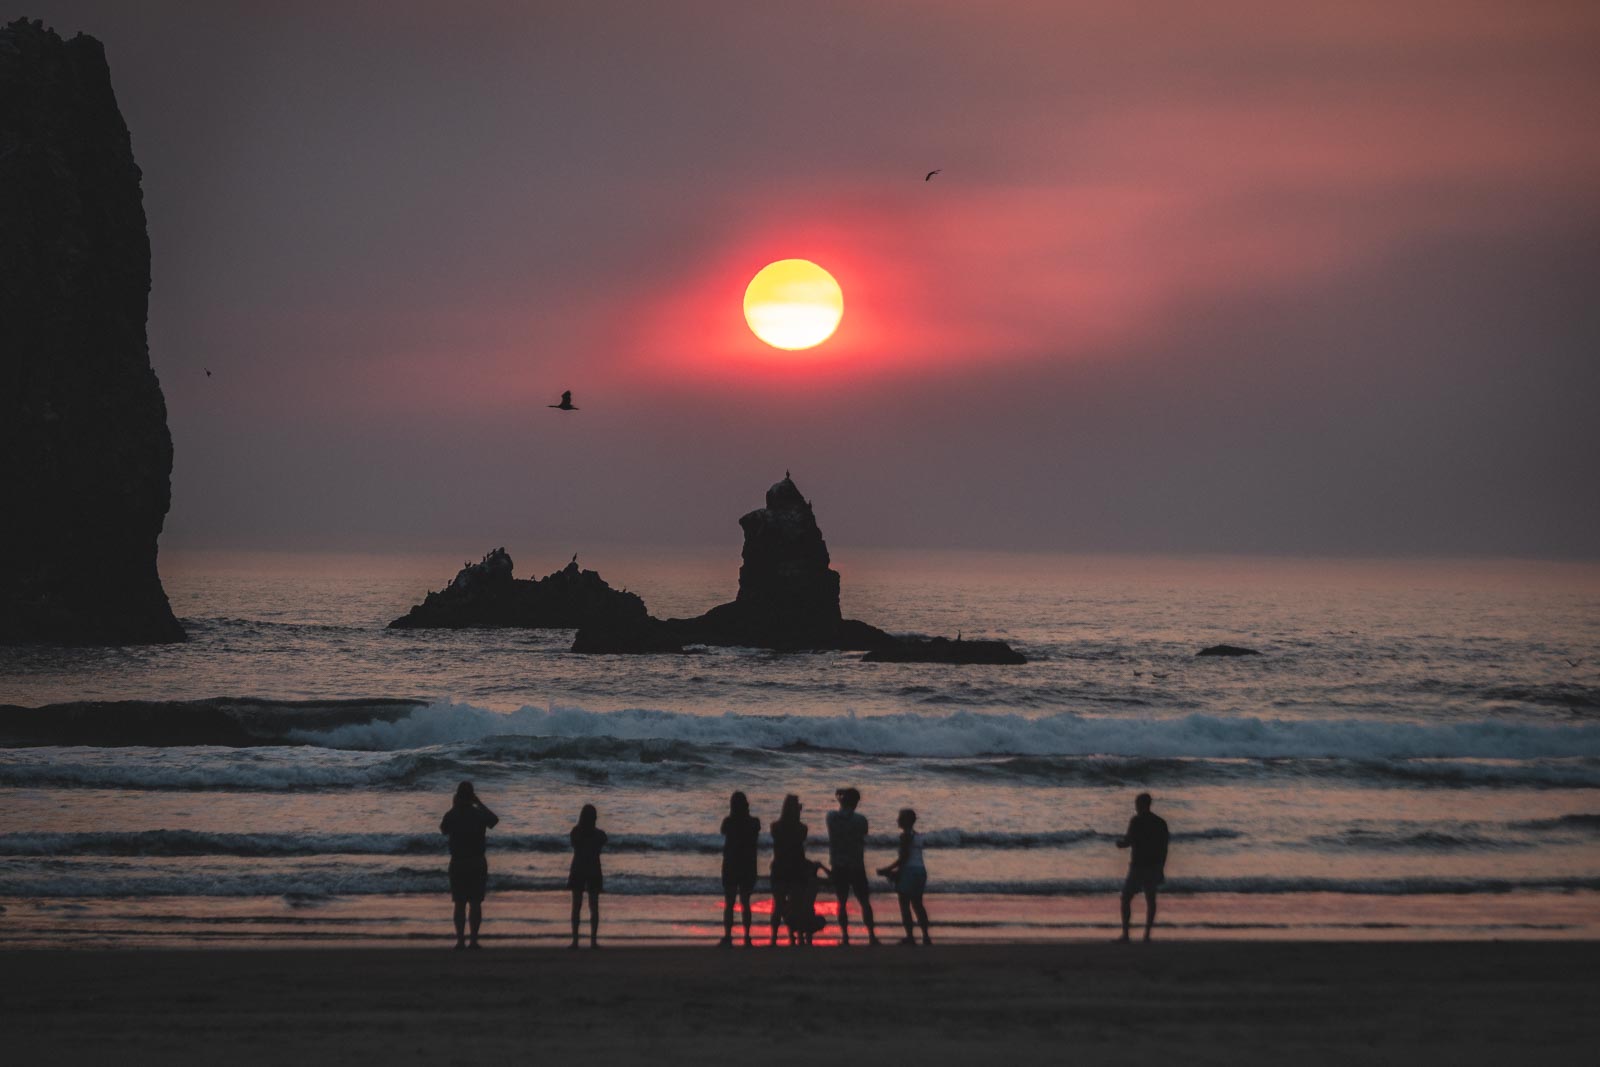 People on beach watching sunset on Cannon Beach out to ocean and rocky island.